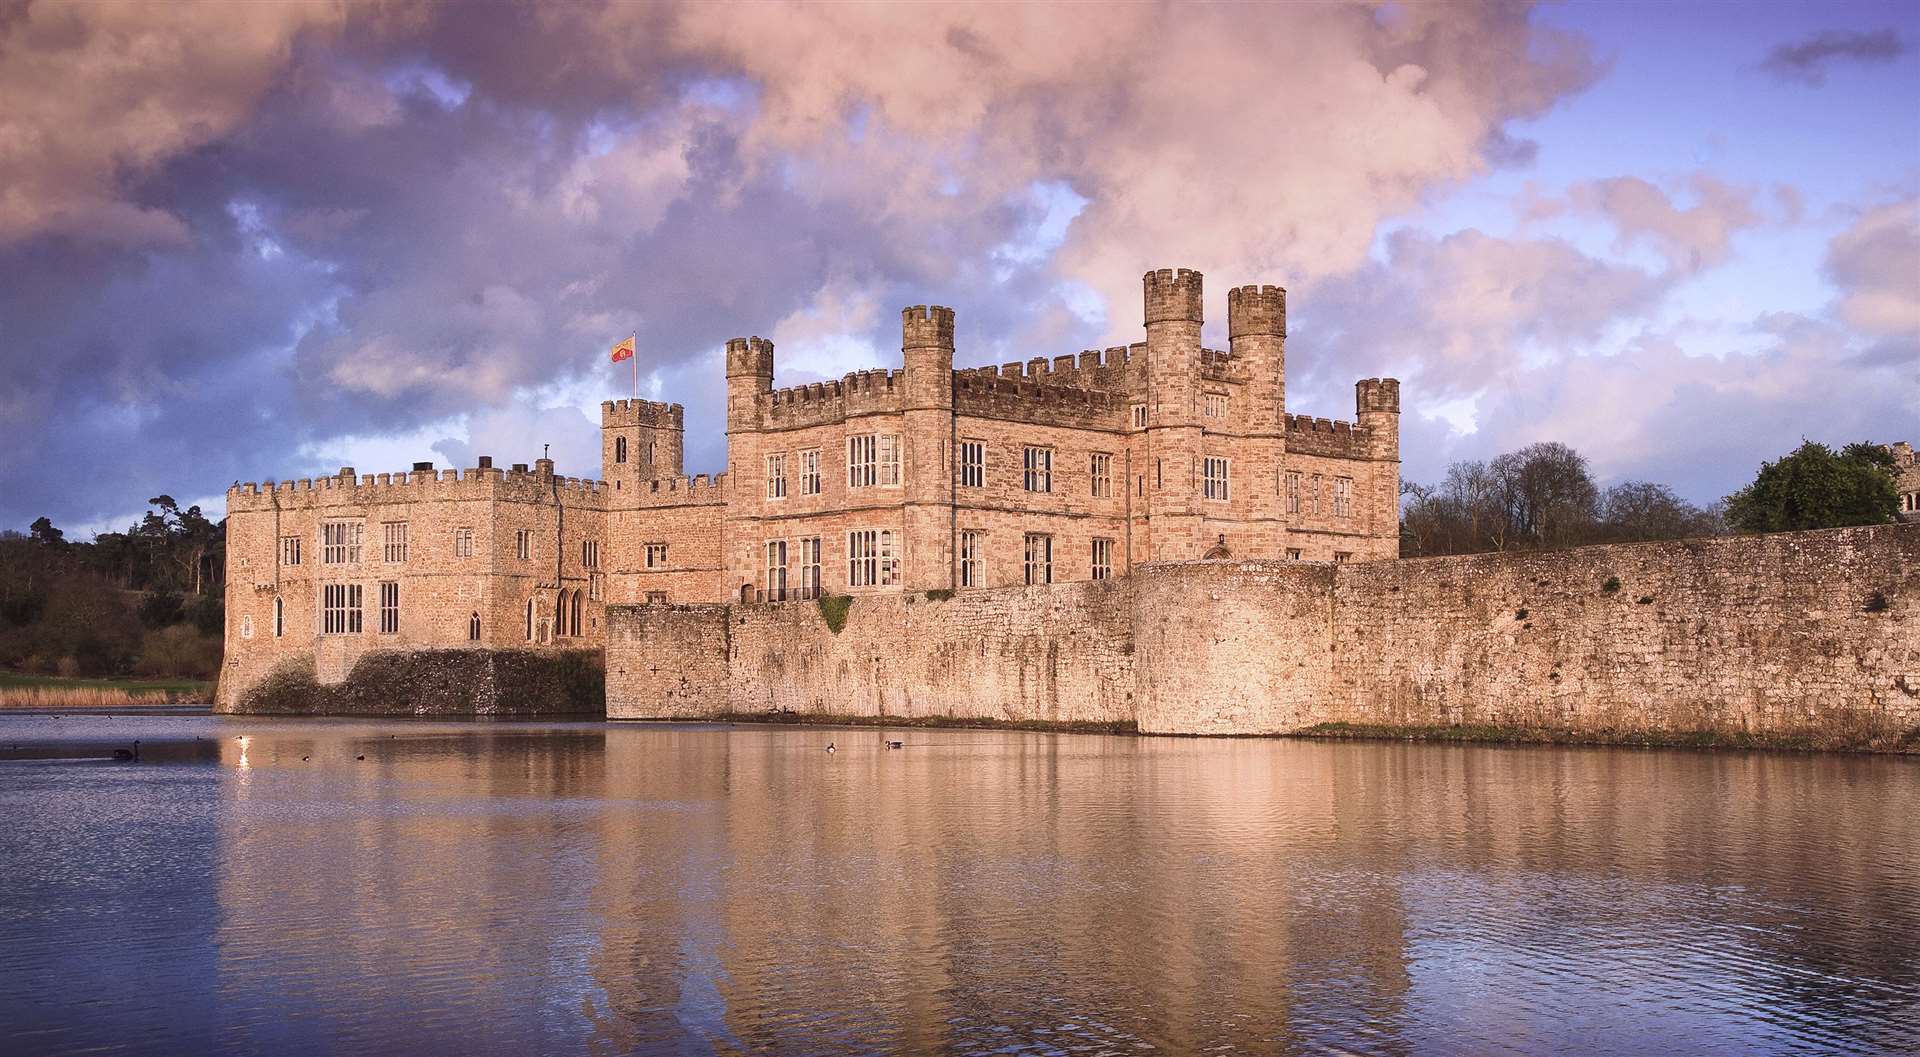 Thousands regular flock to the county's top attractions - such as Leeds Castle - but the coronavirus outbreak is raising serious concerns